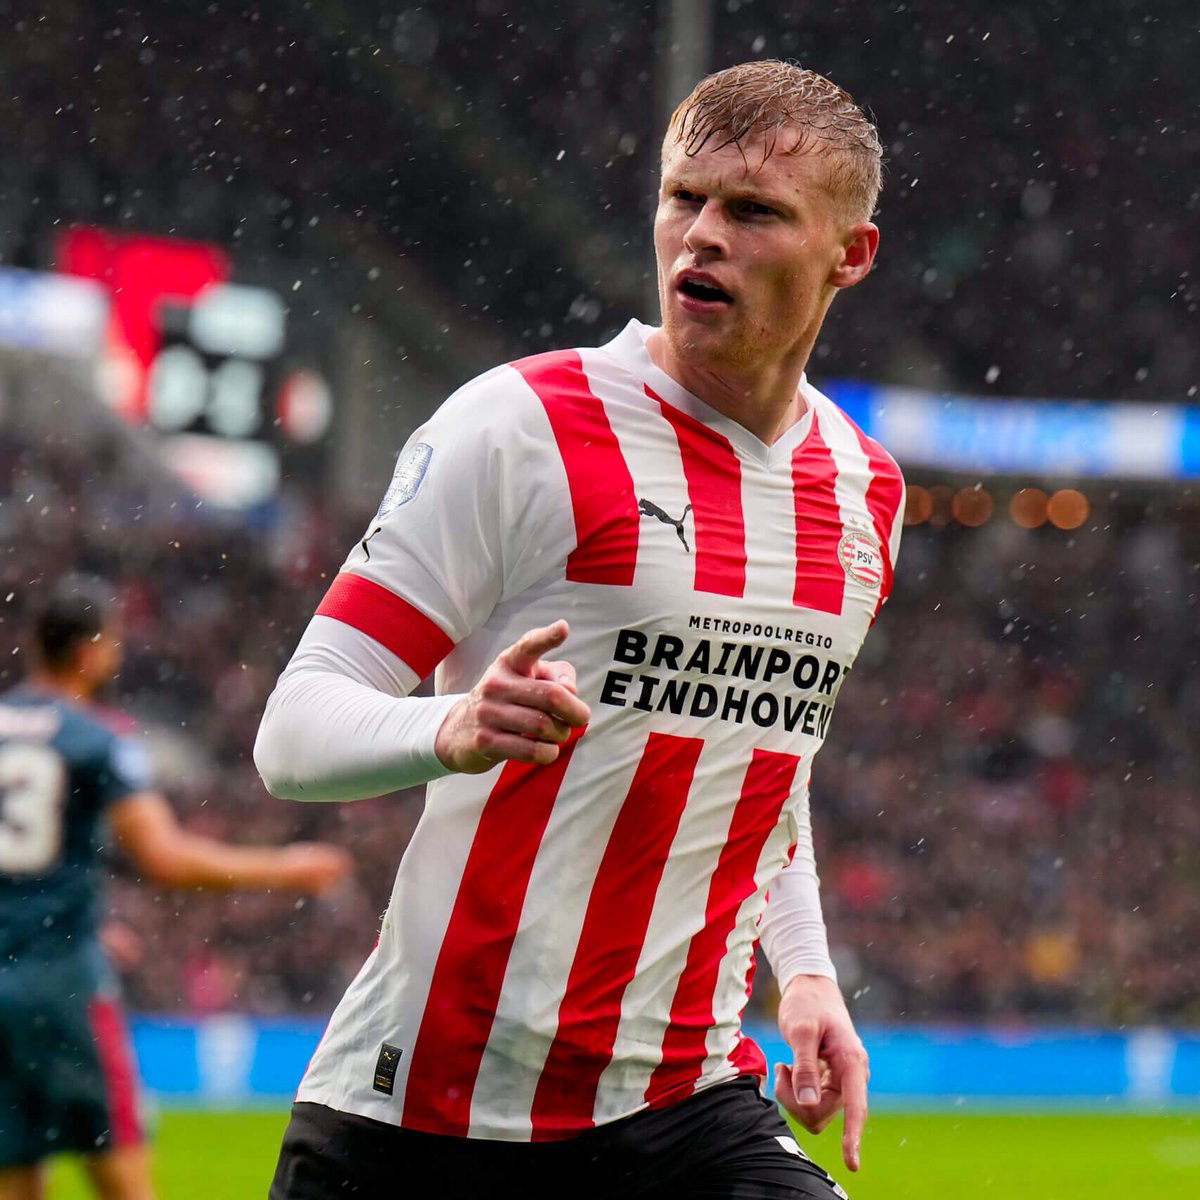 Jarrad Branthwaite - PSV Played 29 games this season including 2-0 wins over both Arsenal and Sevilla. The 20 year old has impressed in Holland linking up with fellow wonder-kids Xavi Simons and Fabio Silva and I'd happily see him in the squad. Surely better than Eric Dier?